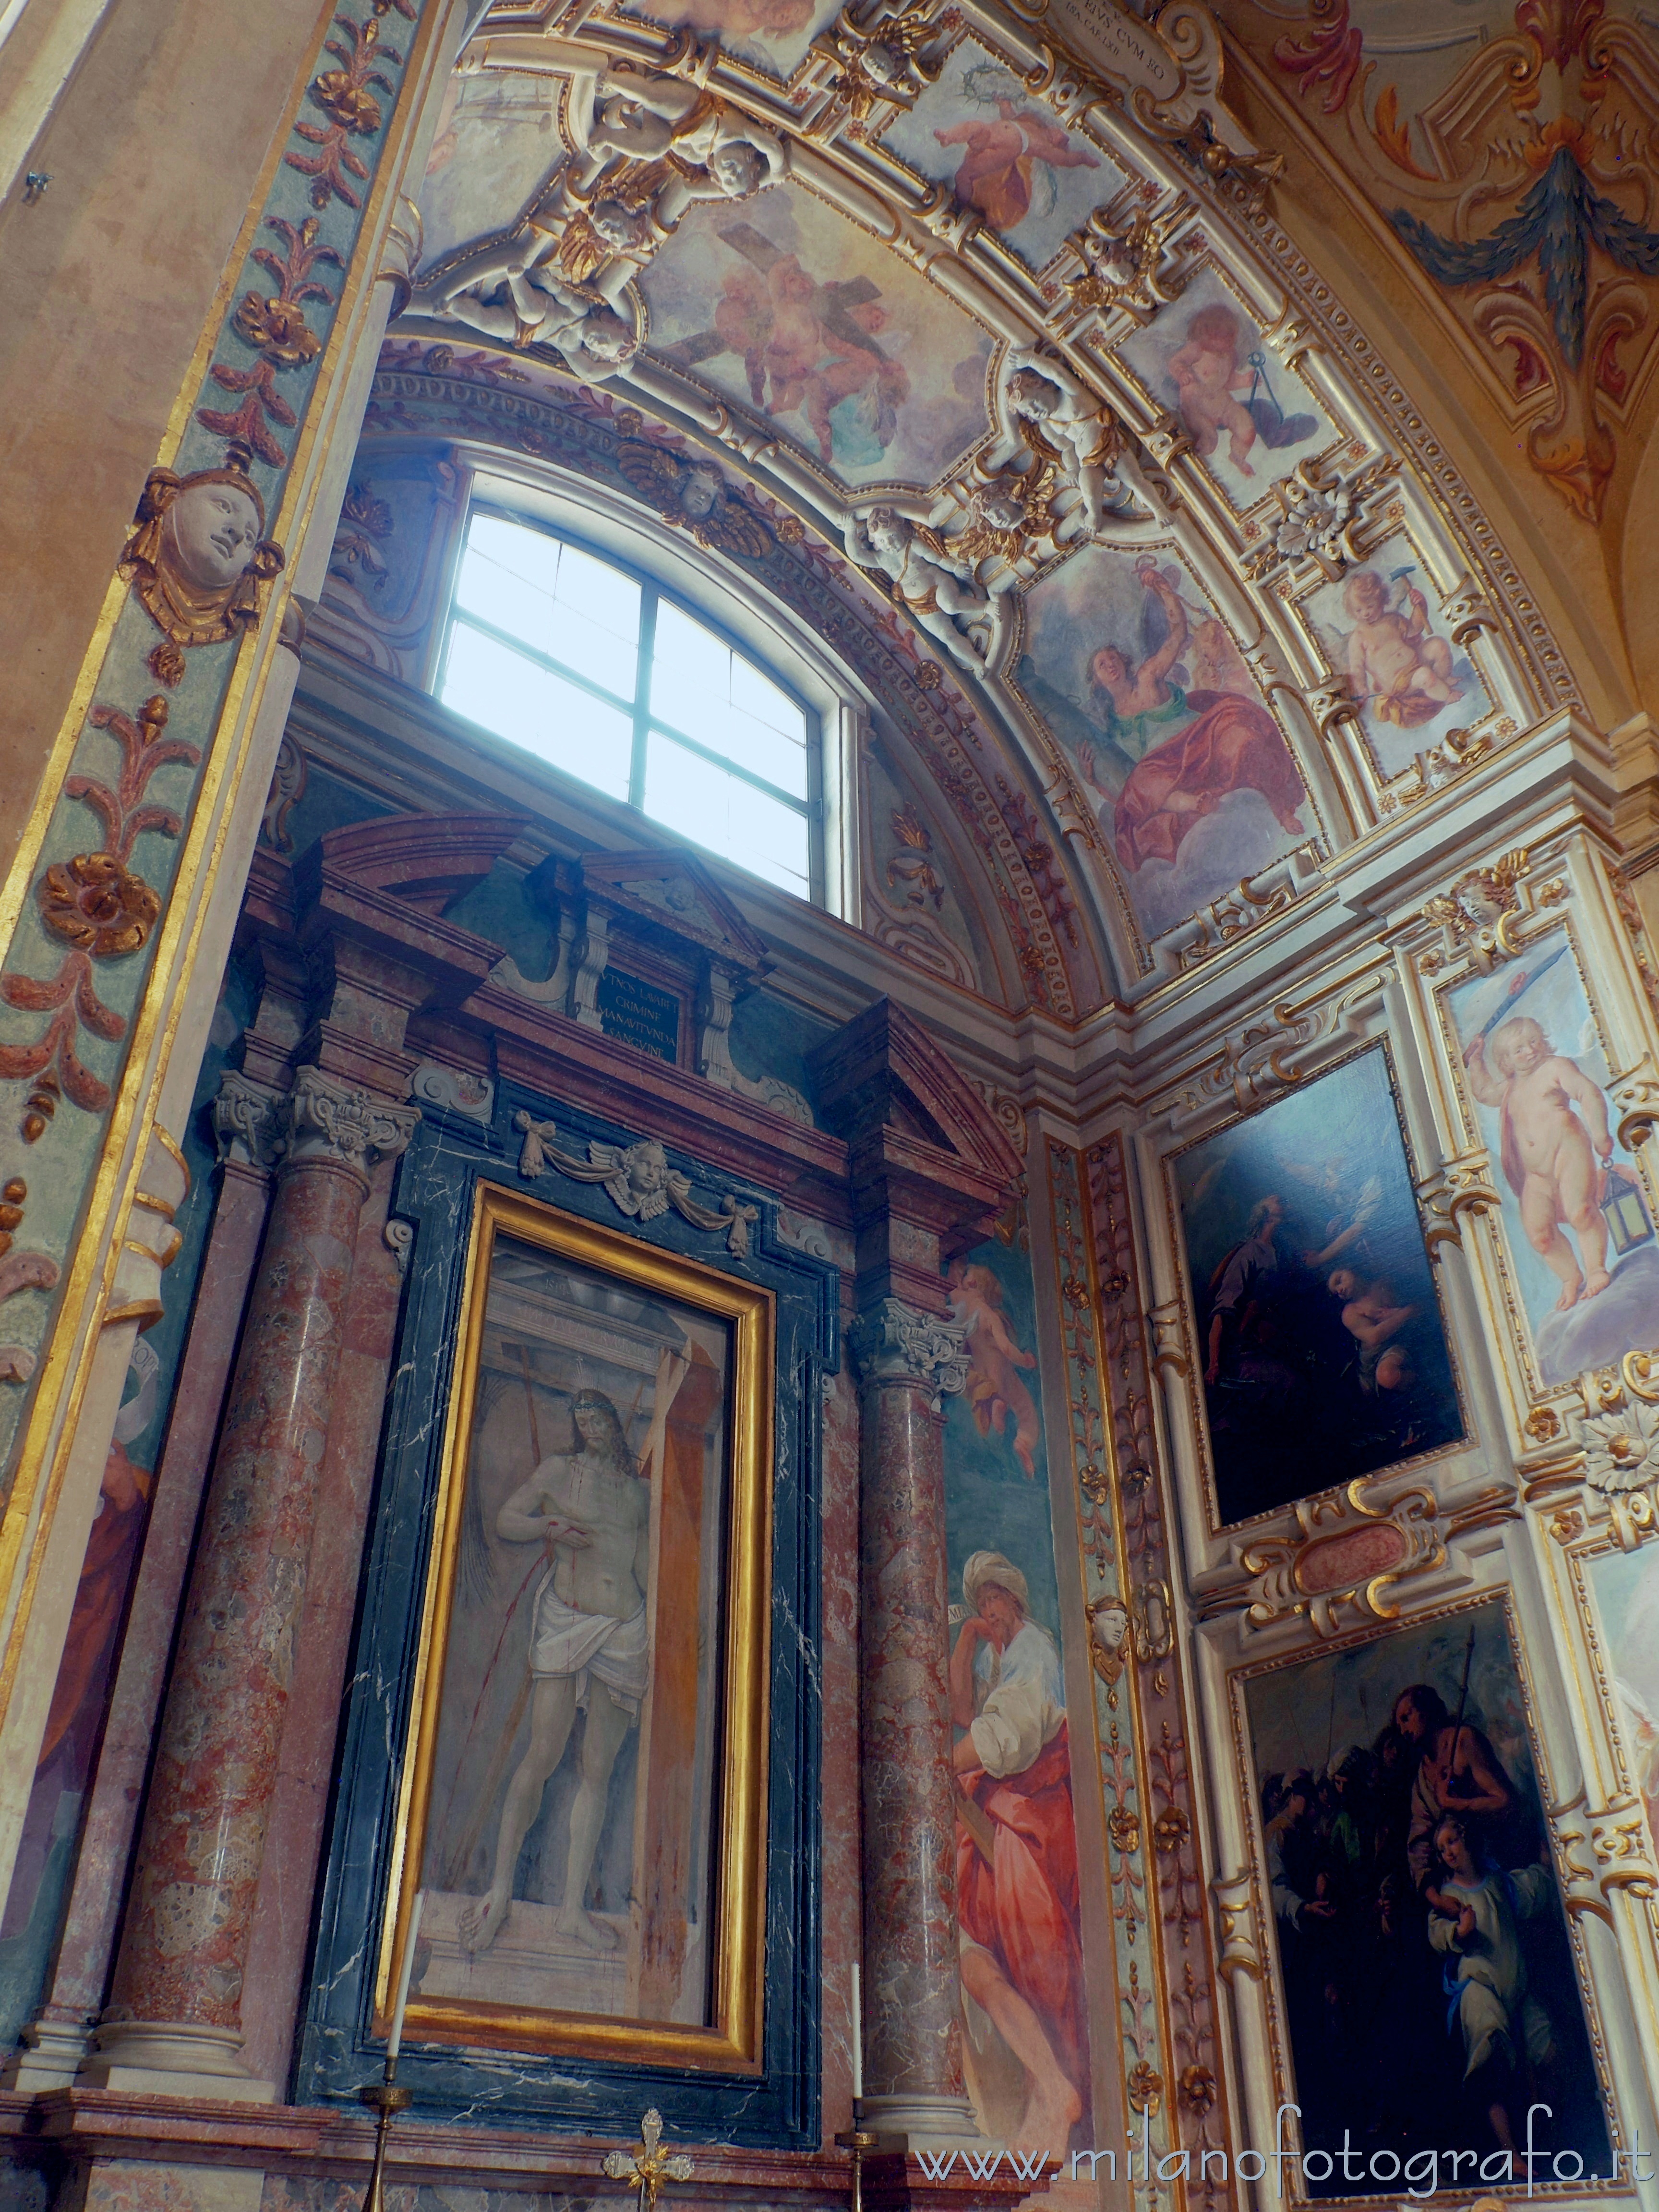 Vimercate (Monza e Brianza, Italy): Right three-quarter view of the Chapel of the Savior in the Sanctuary of the Blessed Virgin of the Rosary - Vimercate (Monza e Brianza, Italy)